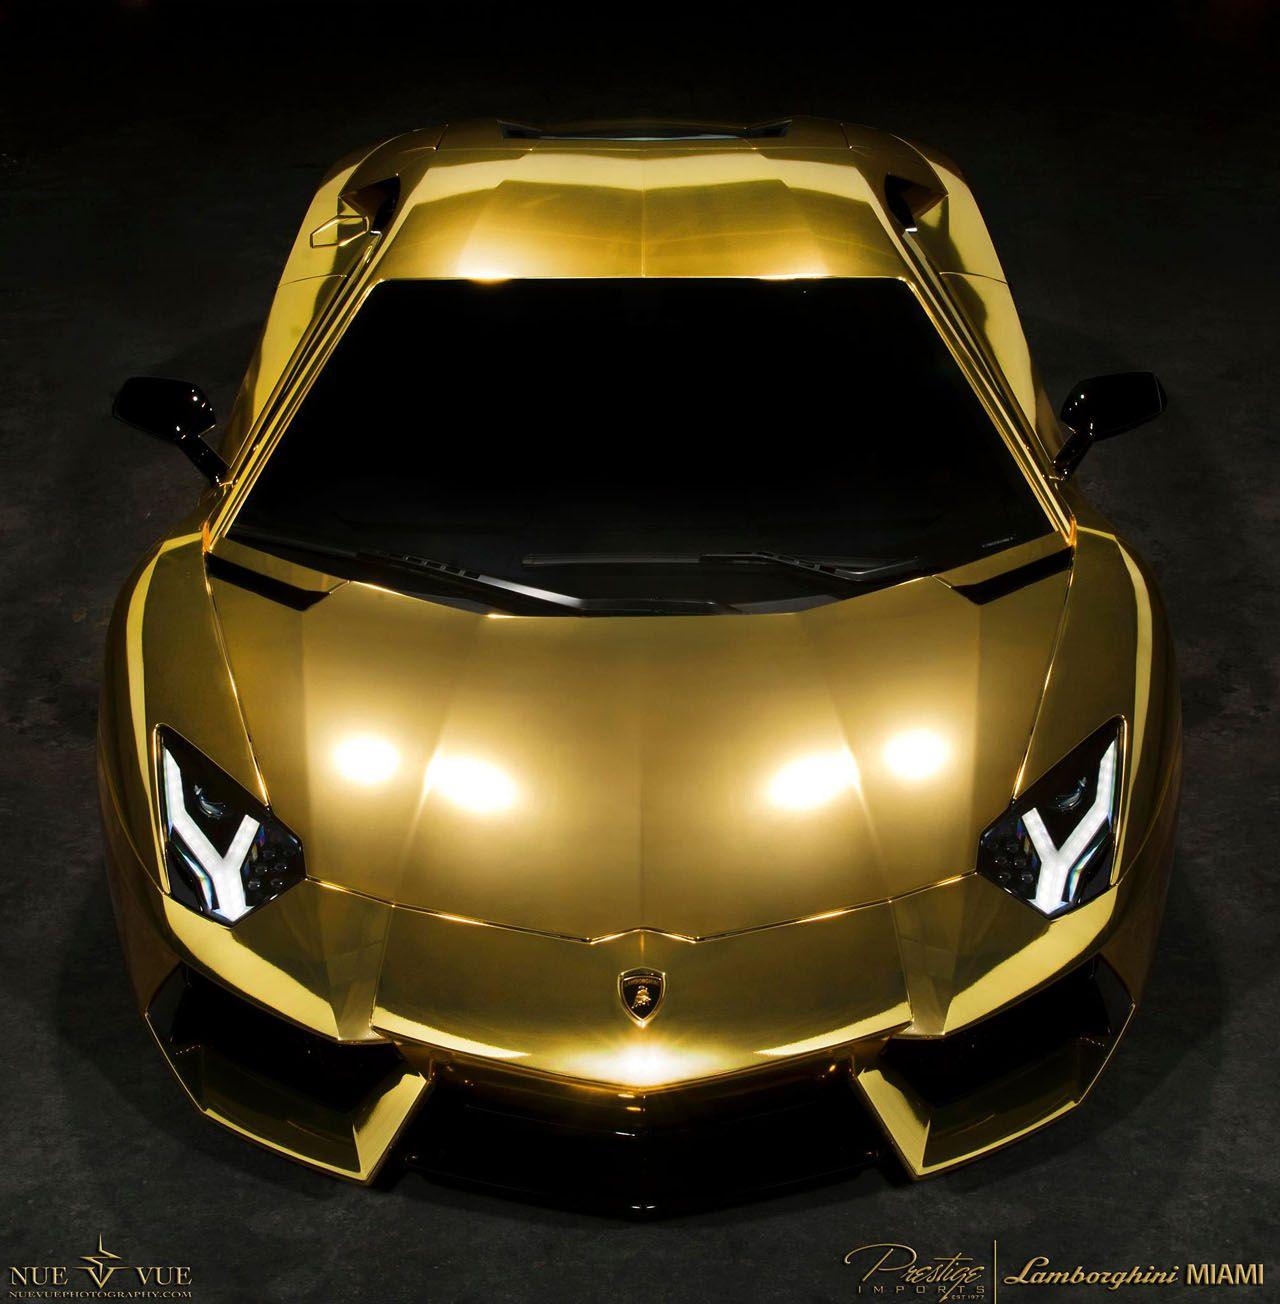 Gold Lambo Logo - The midas touch project AU79 gold finished Aventador ...